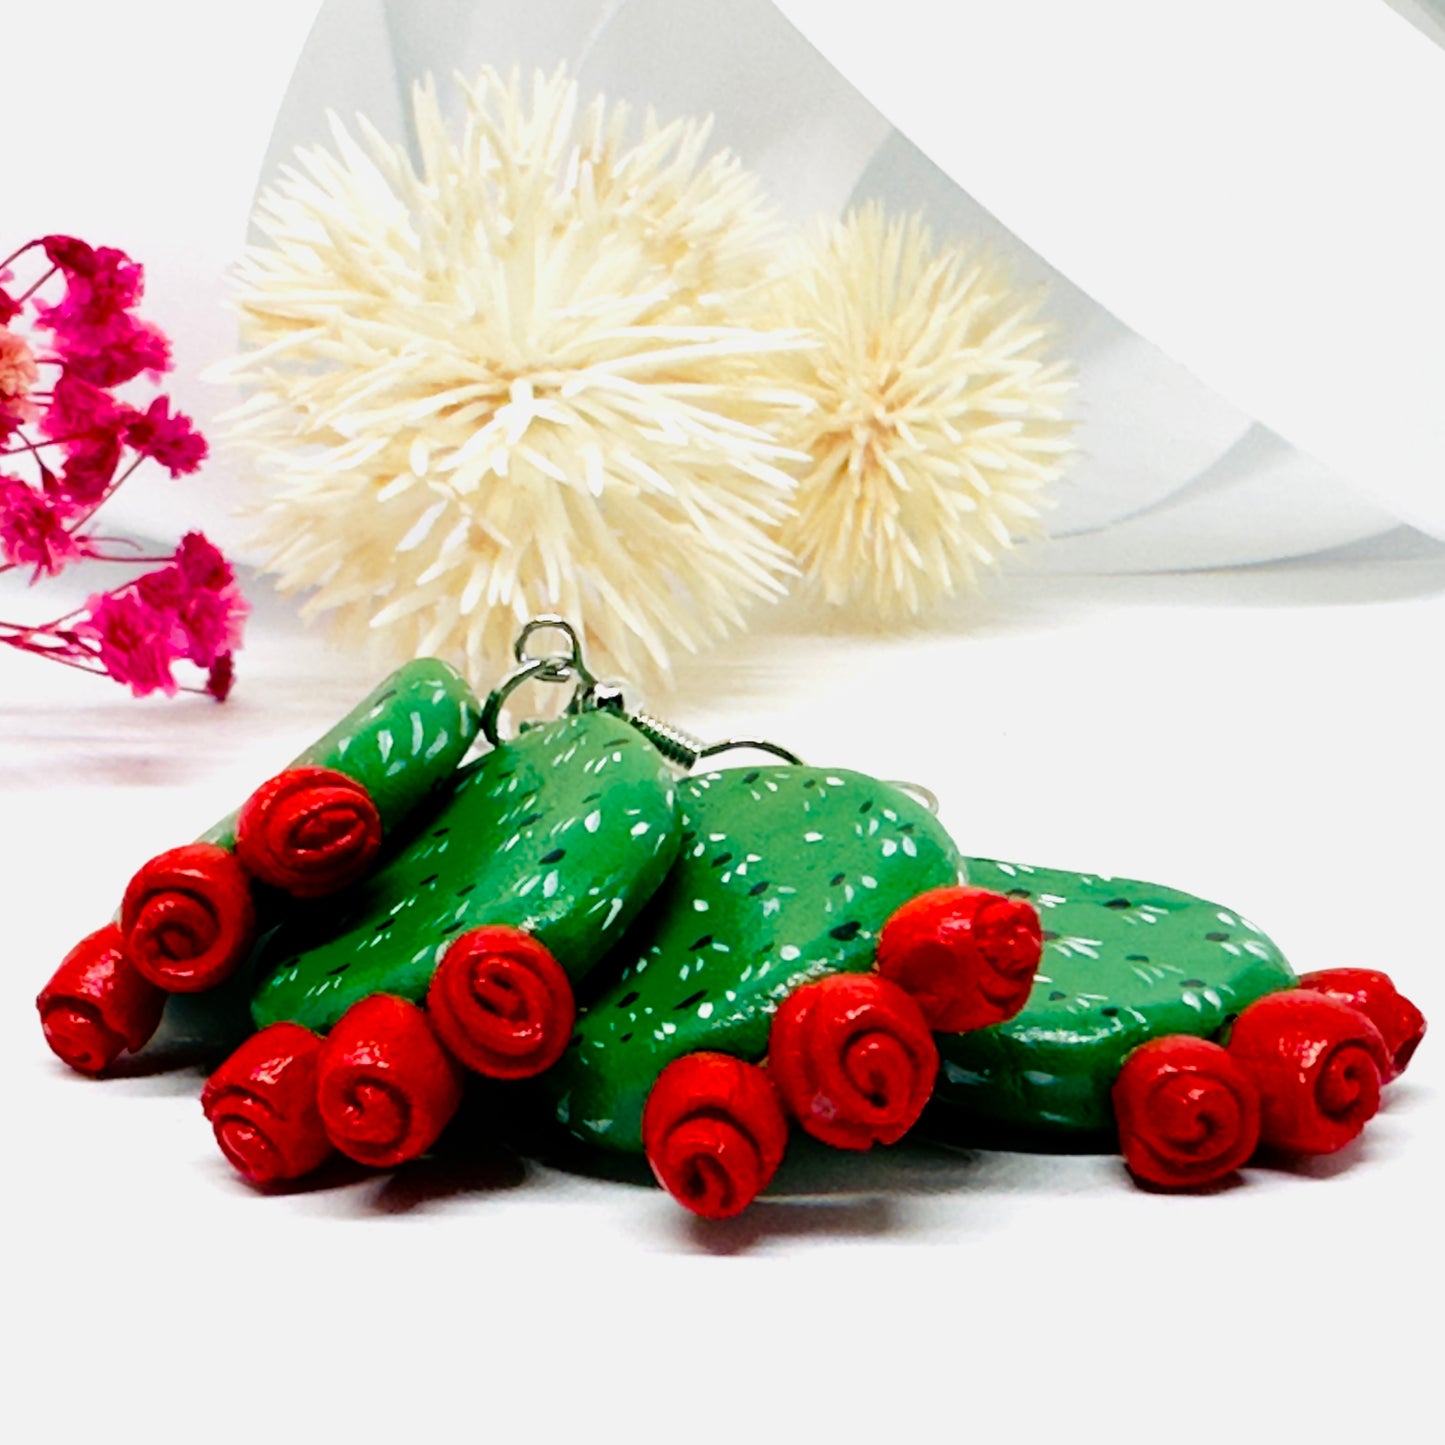 Clay cactus earrings handprinted by Mexican artisans with red cactus flowers for Mexicanias, claywelry, fridalovers, fridamaniacs, and Frida fans. Women girl gift idea.